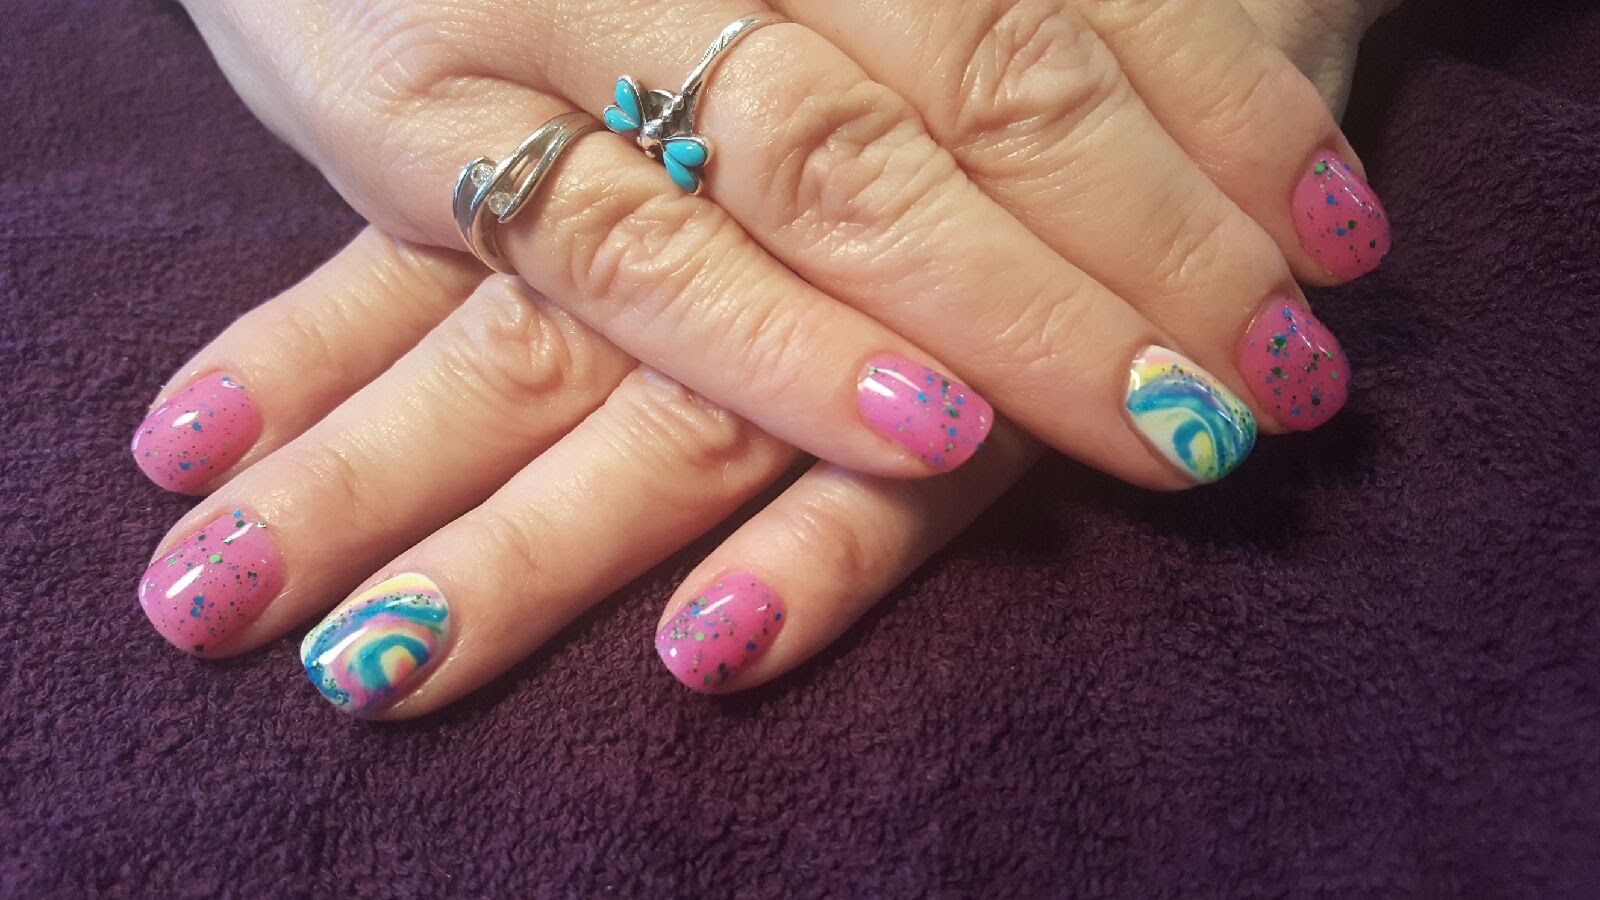 More Than Nails by Michele